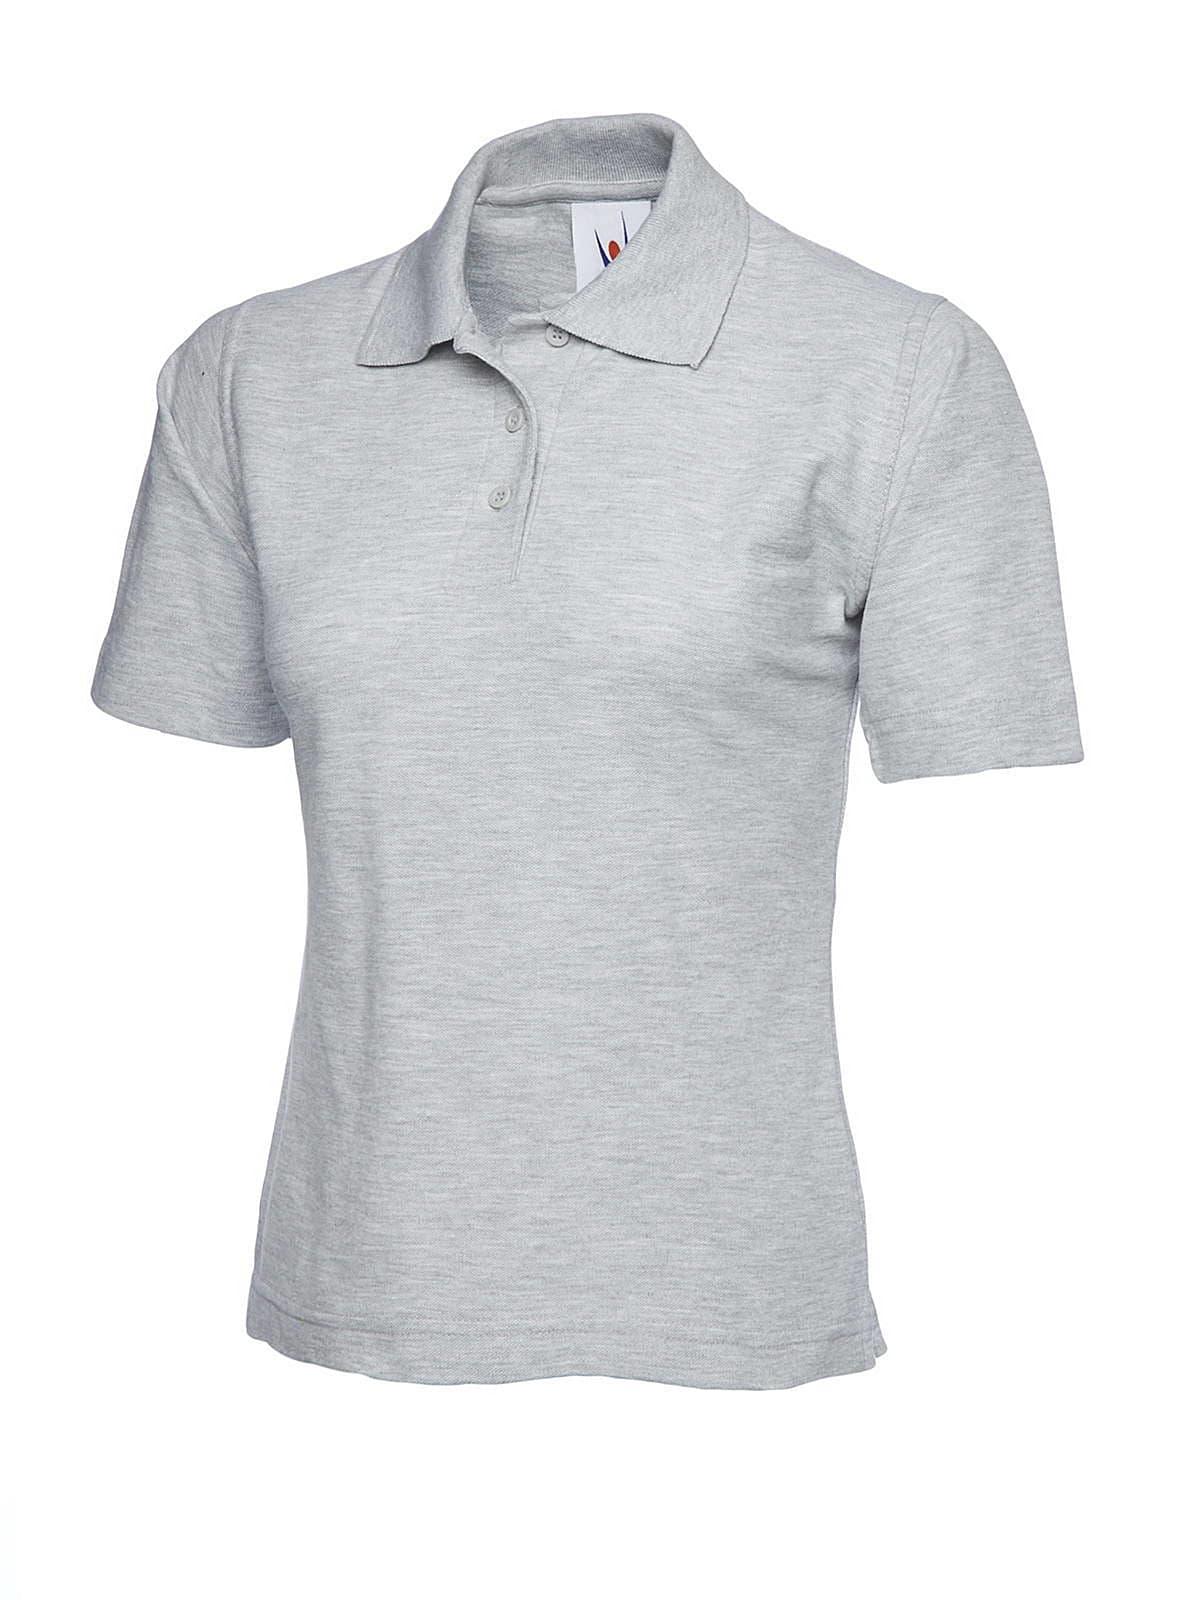 Uneek 220GSM Womens Polo Shirt in Heather Grey (Product Code: UC106)